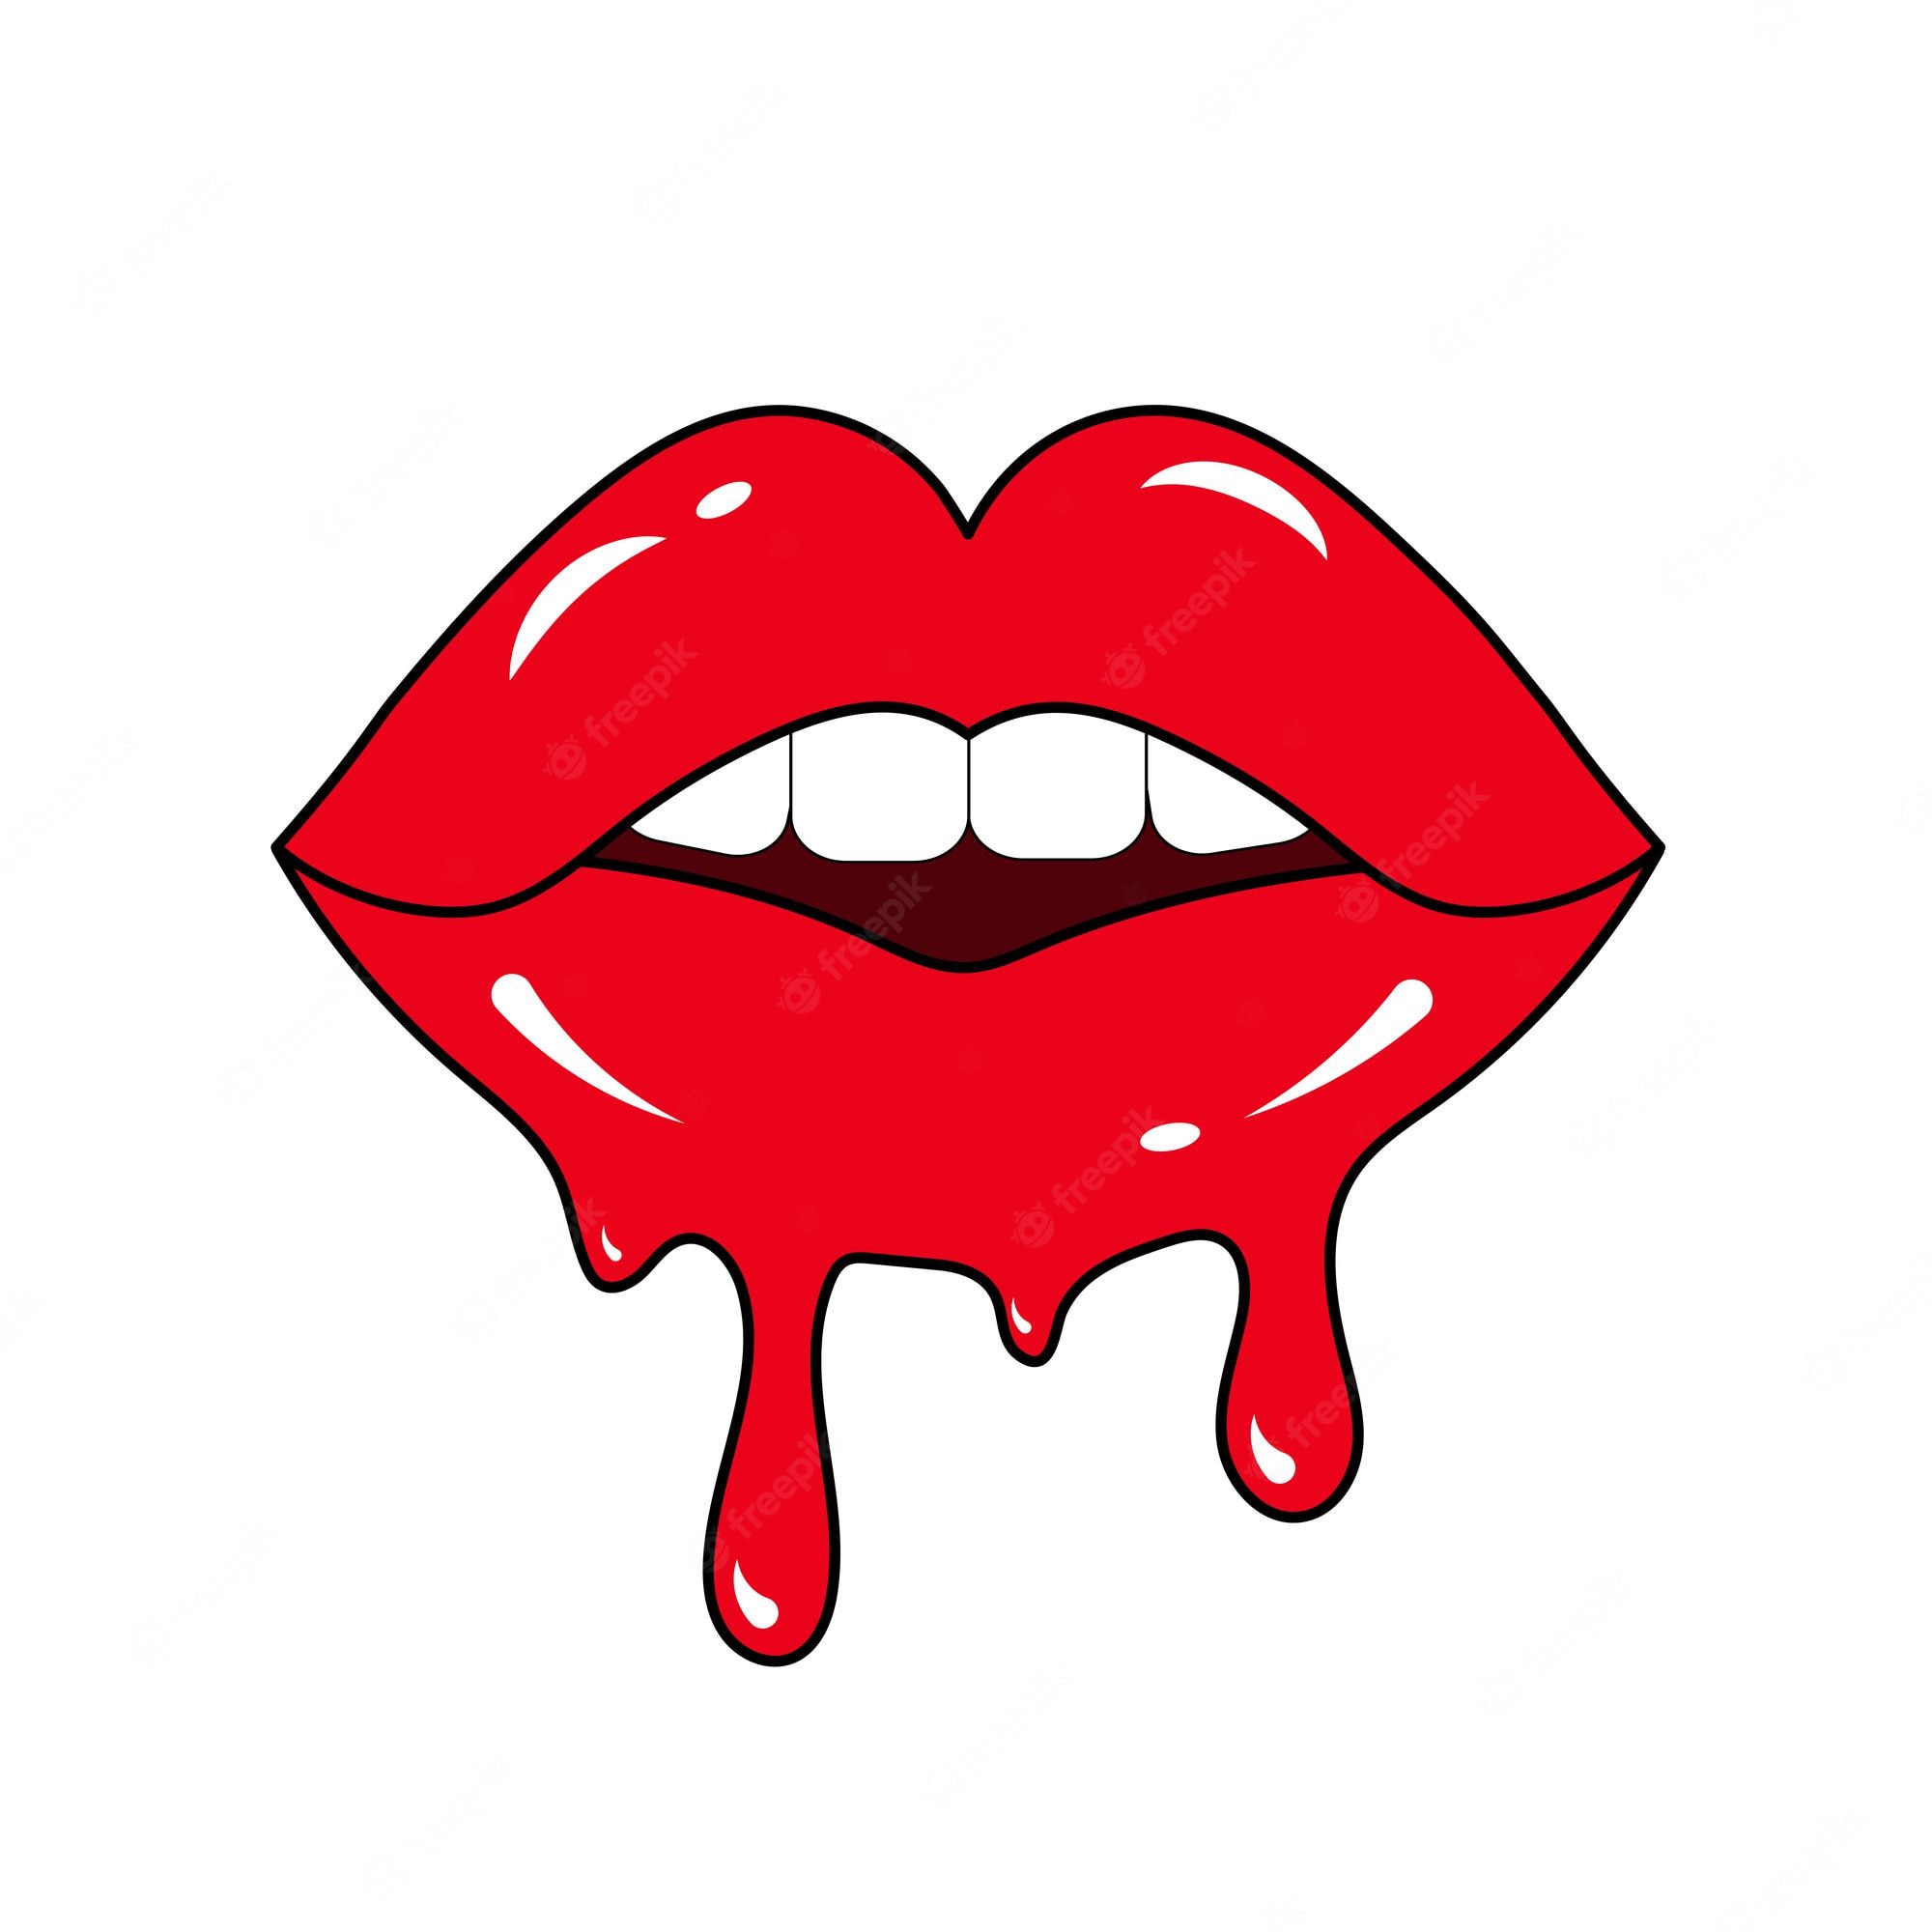 Dripping lips Vectors & Illustrations for Free Download